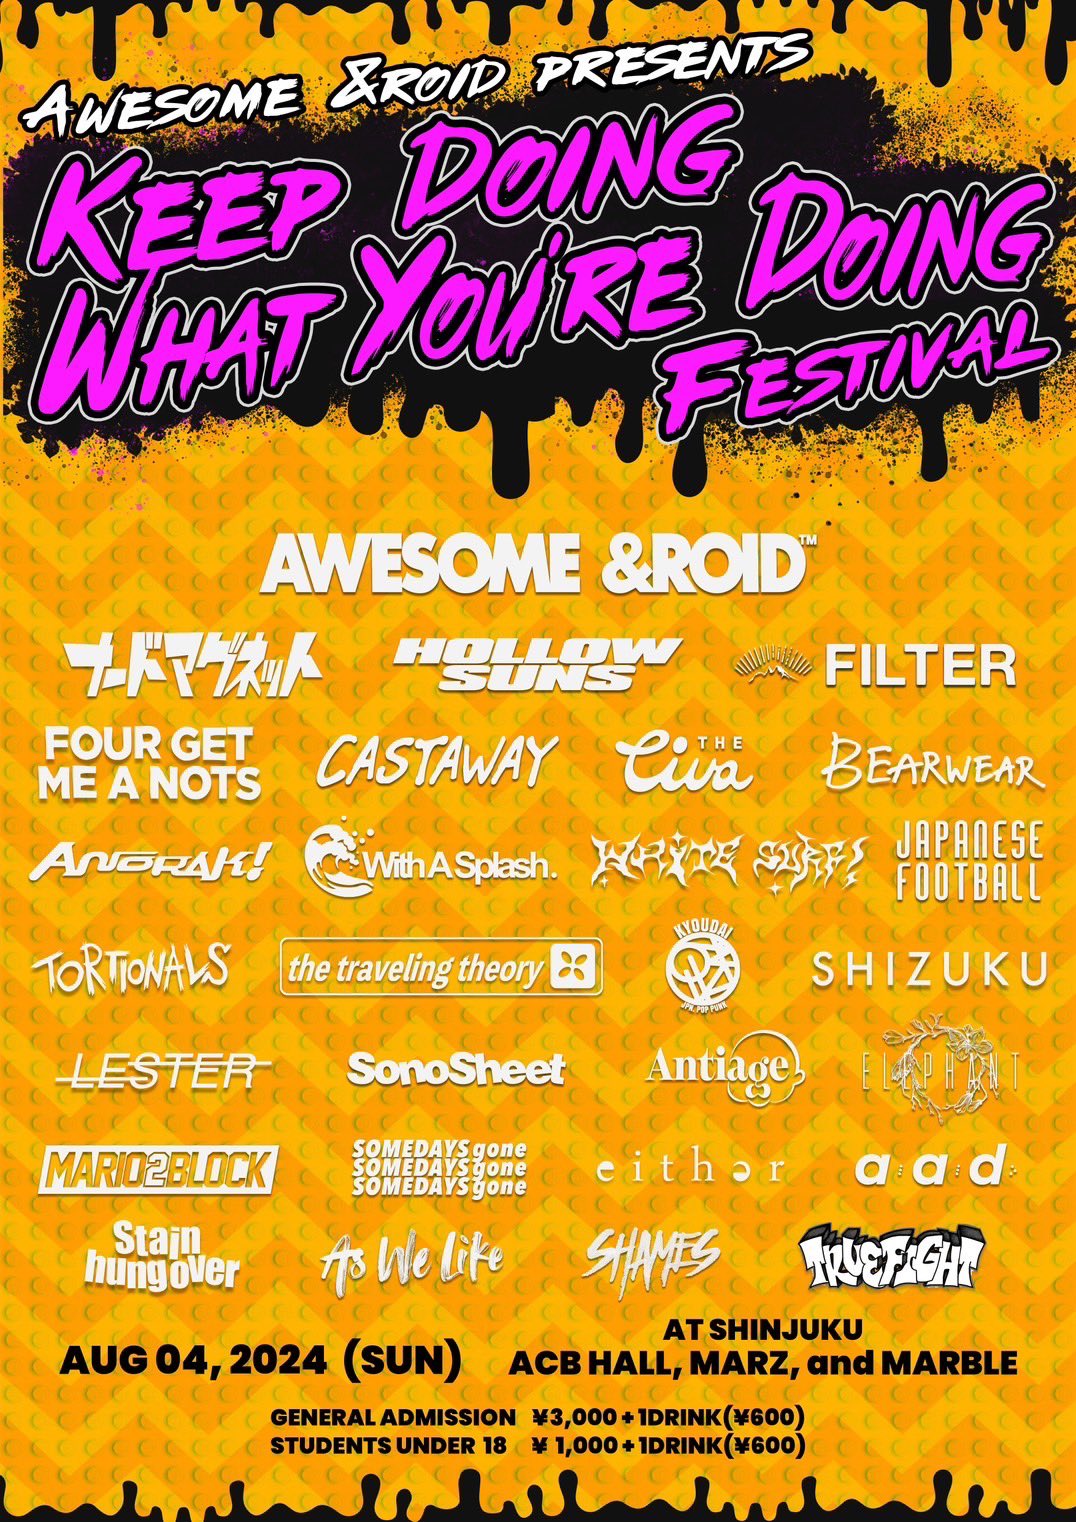 Awesome &roid pre “Keep Doing what you’re doing Festival”